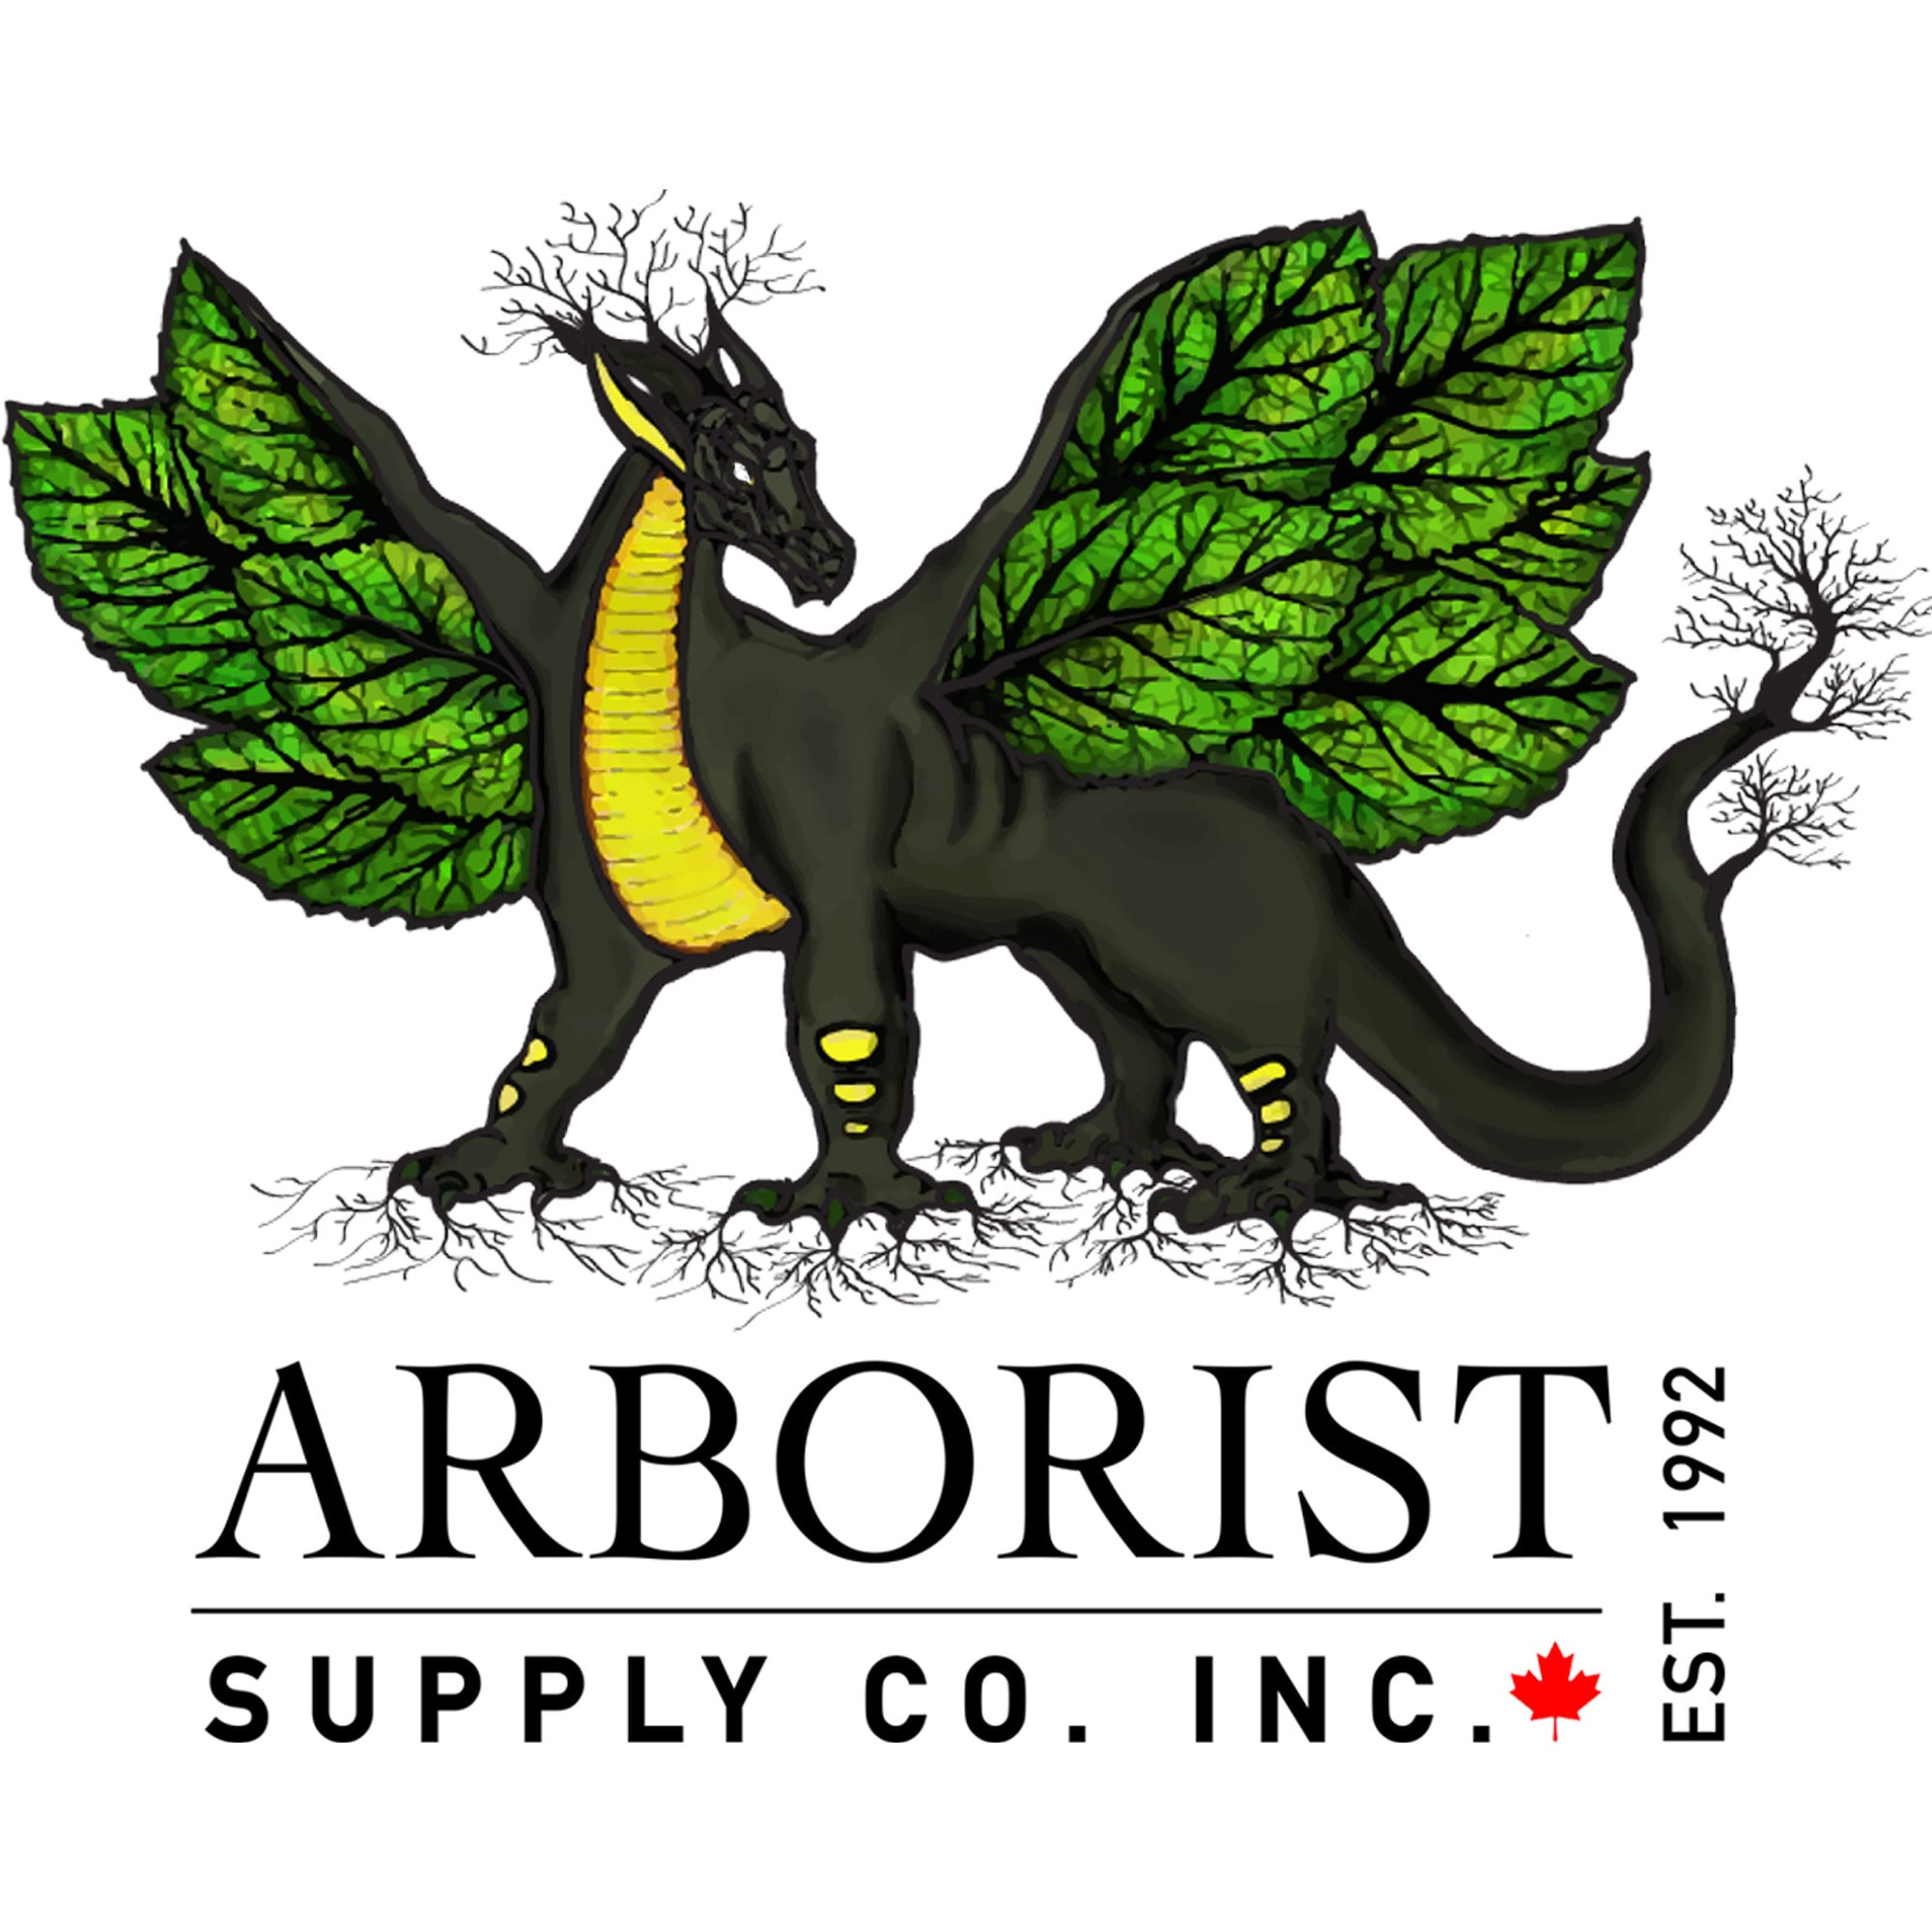 Lawn & Arborist Tools  Landscaping Supplies Shipped Nationwide